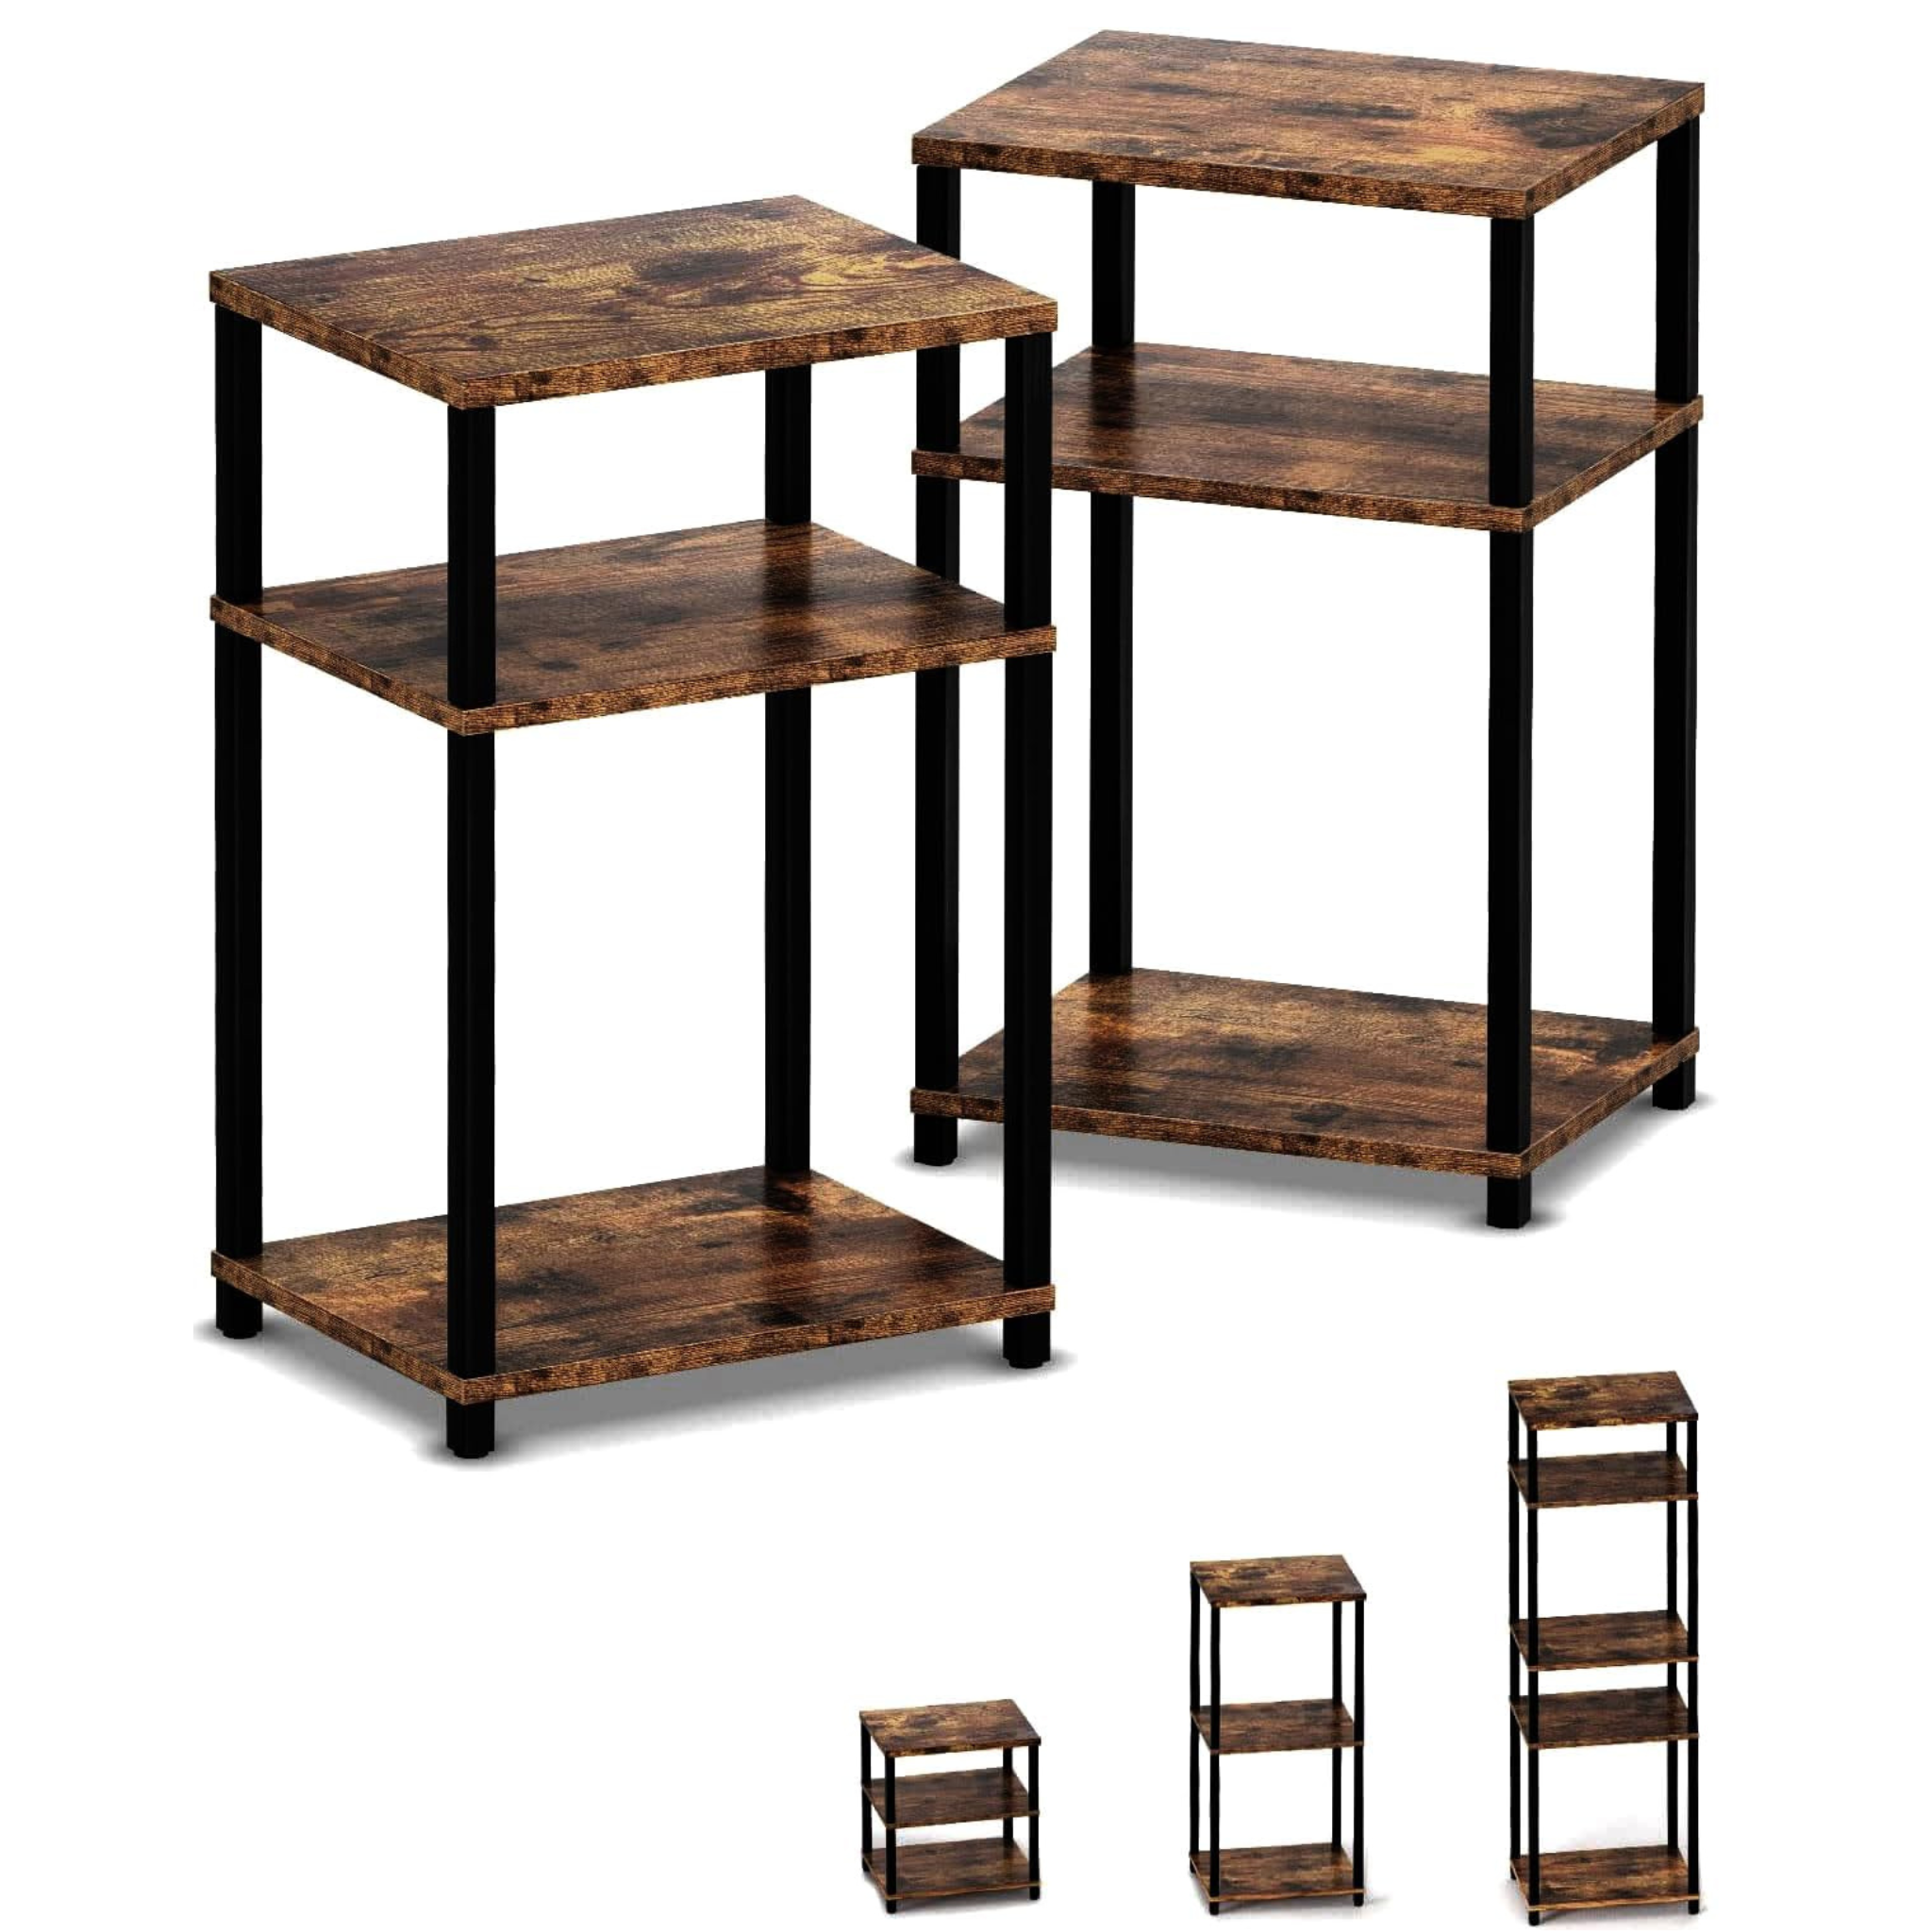 2 End Table Night Stands